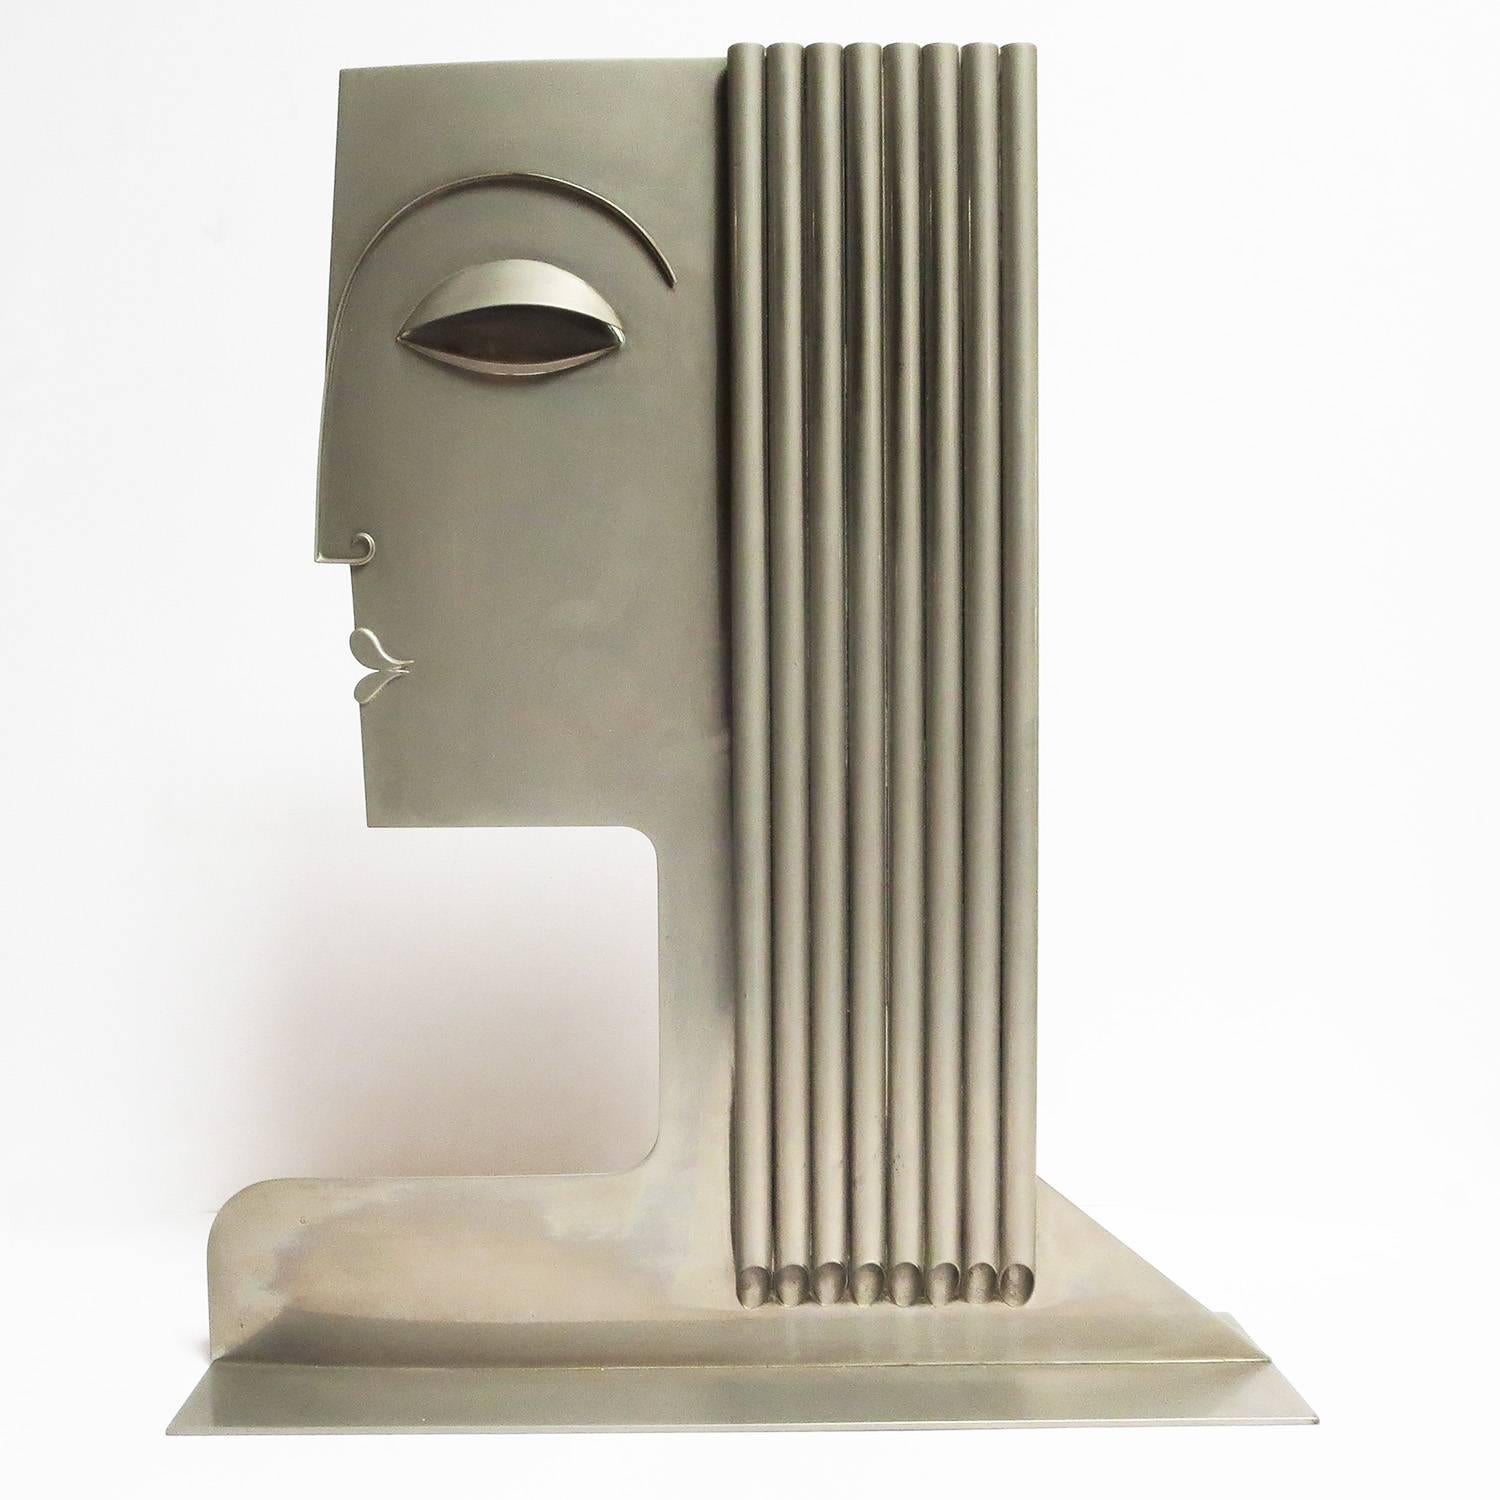 The most sought after of the Art Deco sculptures by Hagenauer are certainly the 